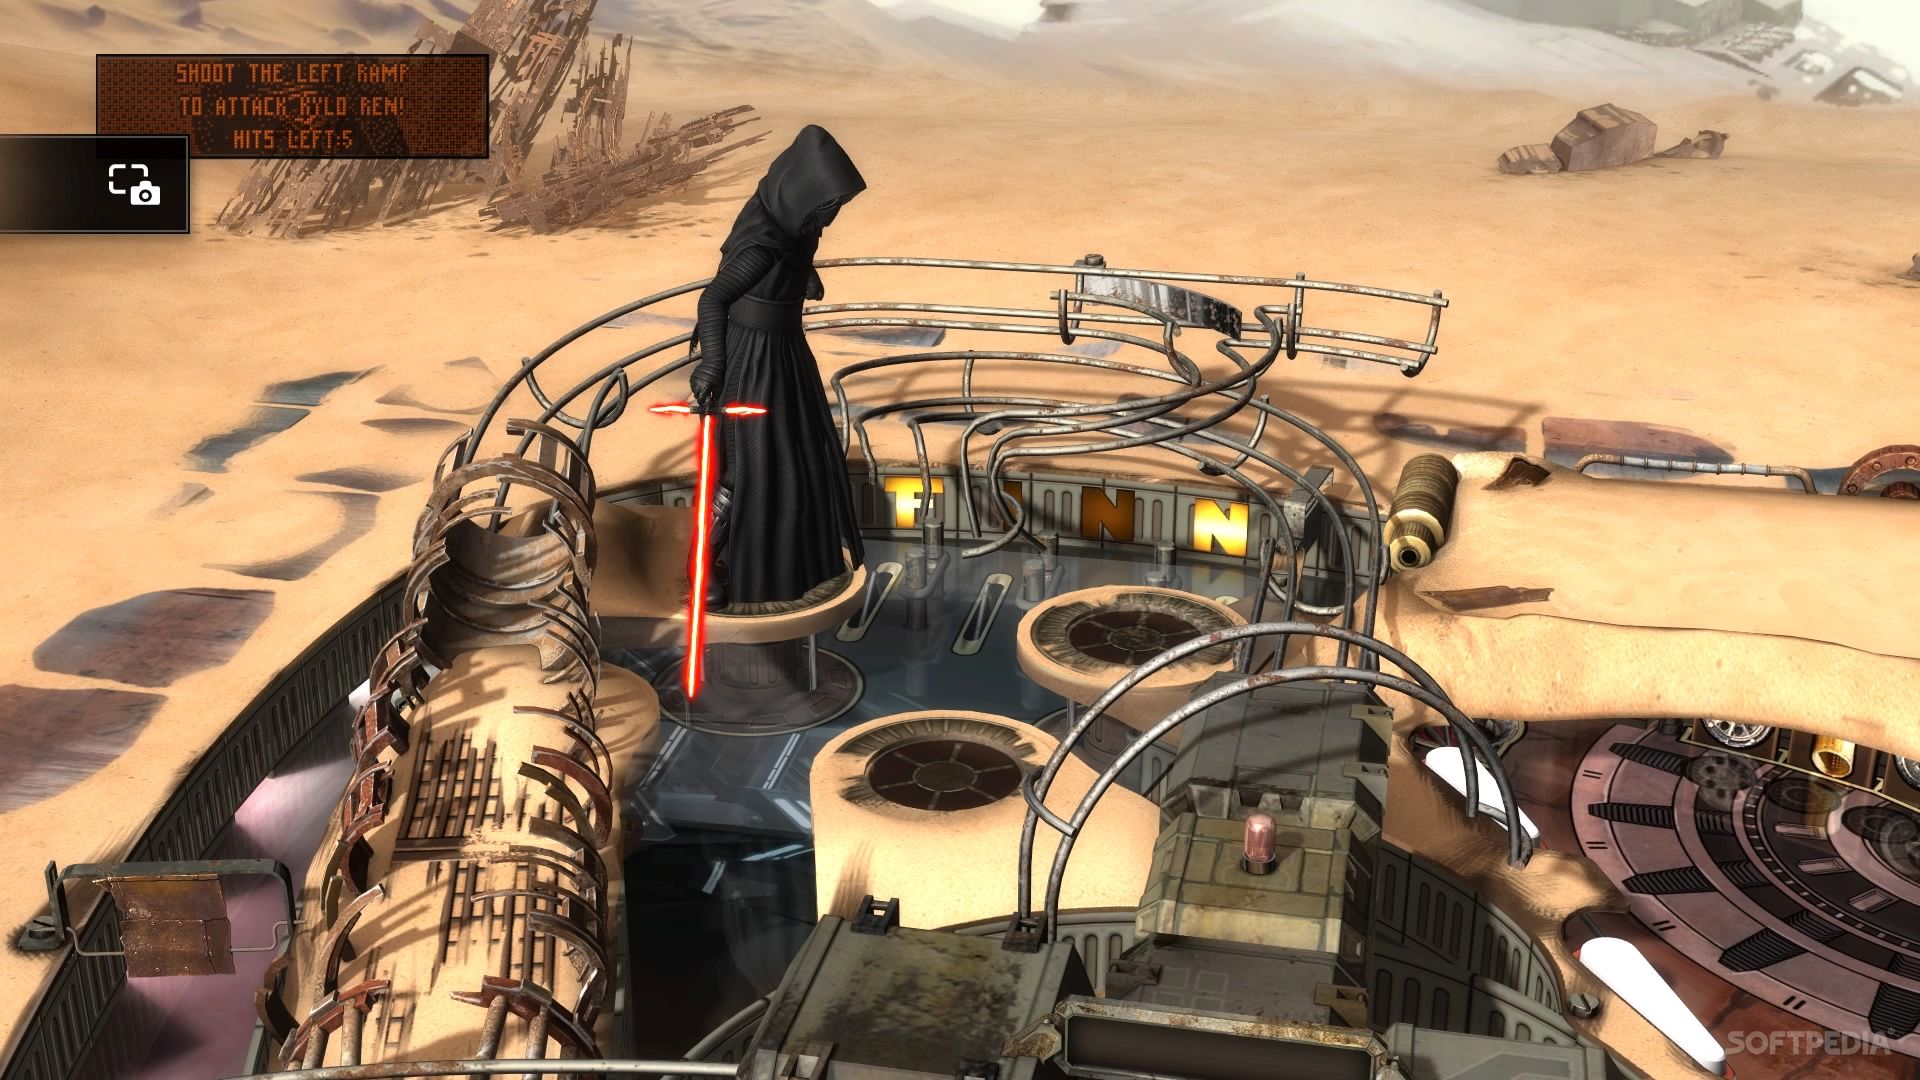 download star wars the force awakens game